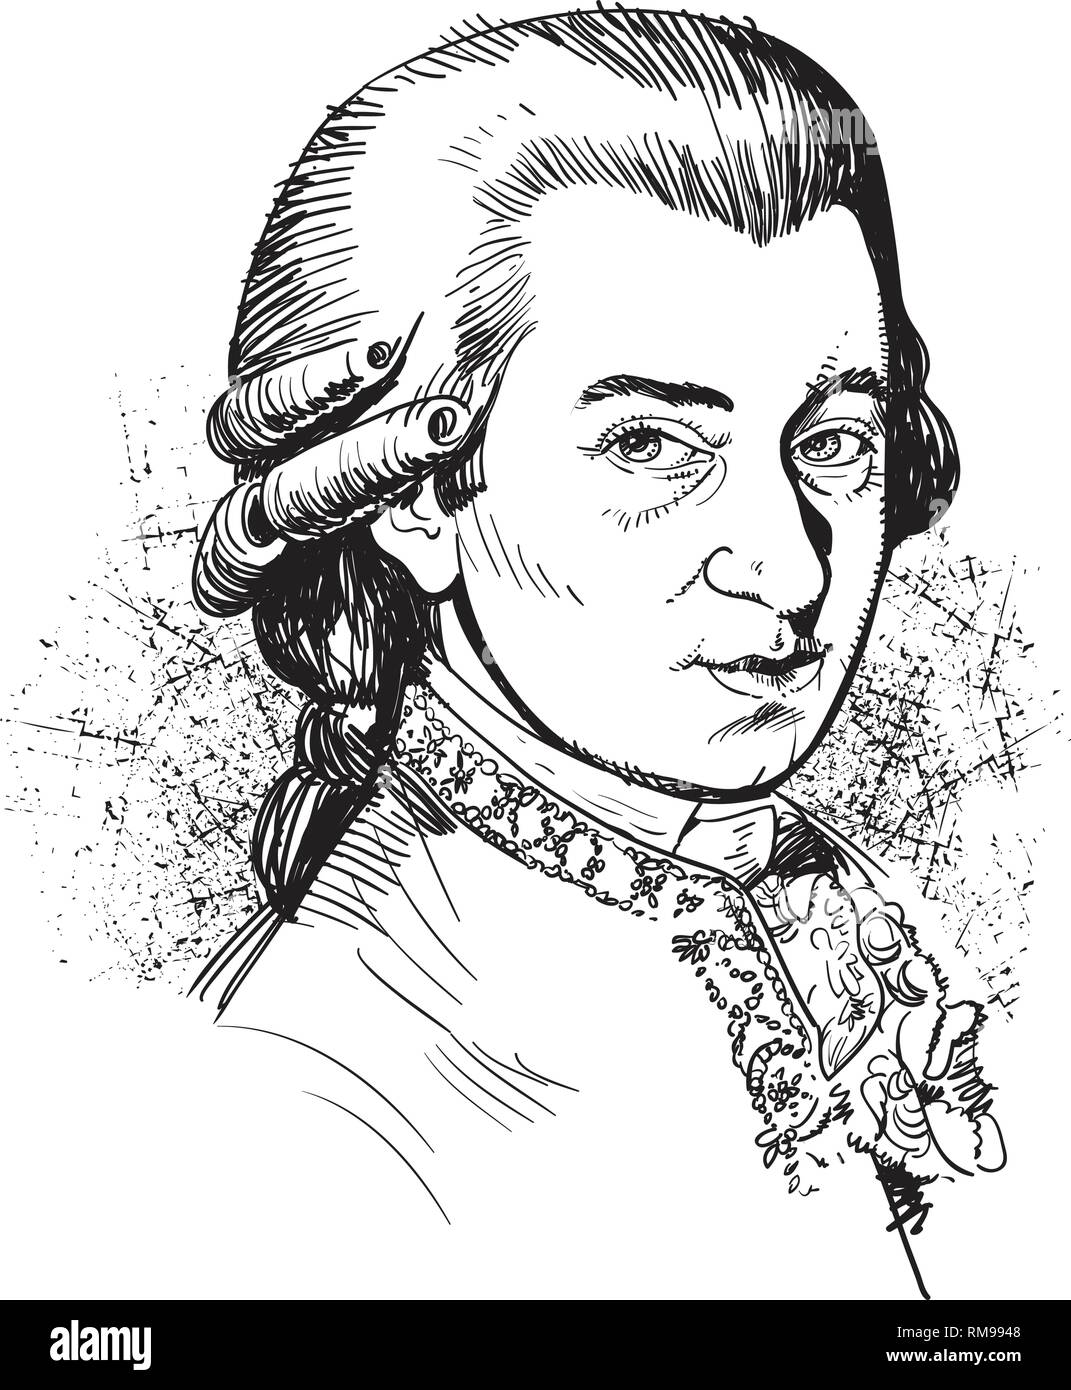 Wolfgang Amadeus Mozart portrait in line art illustration. He was prolific and influential composer of the classical music era. Stock Vector